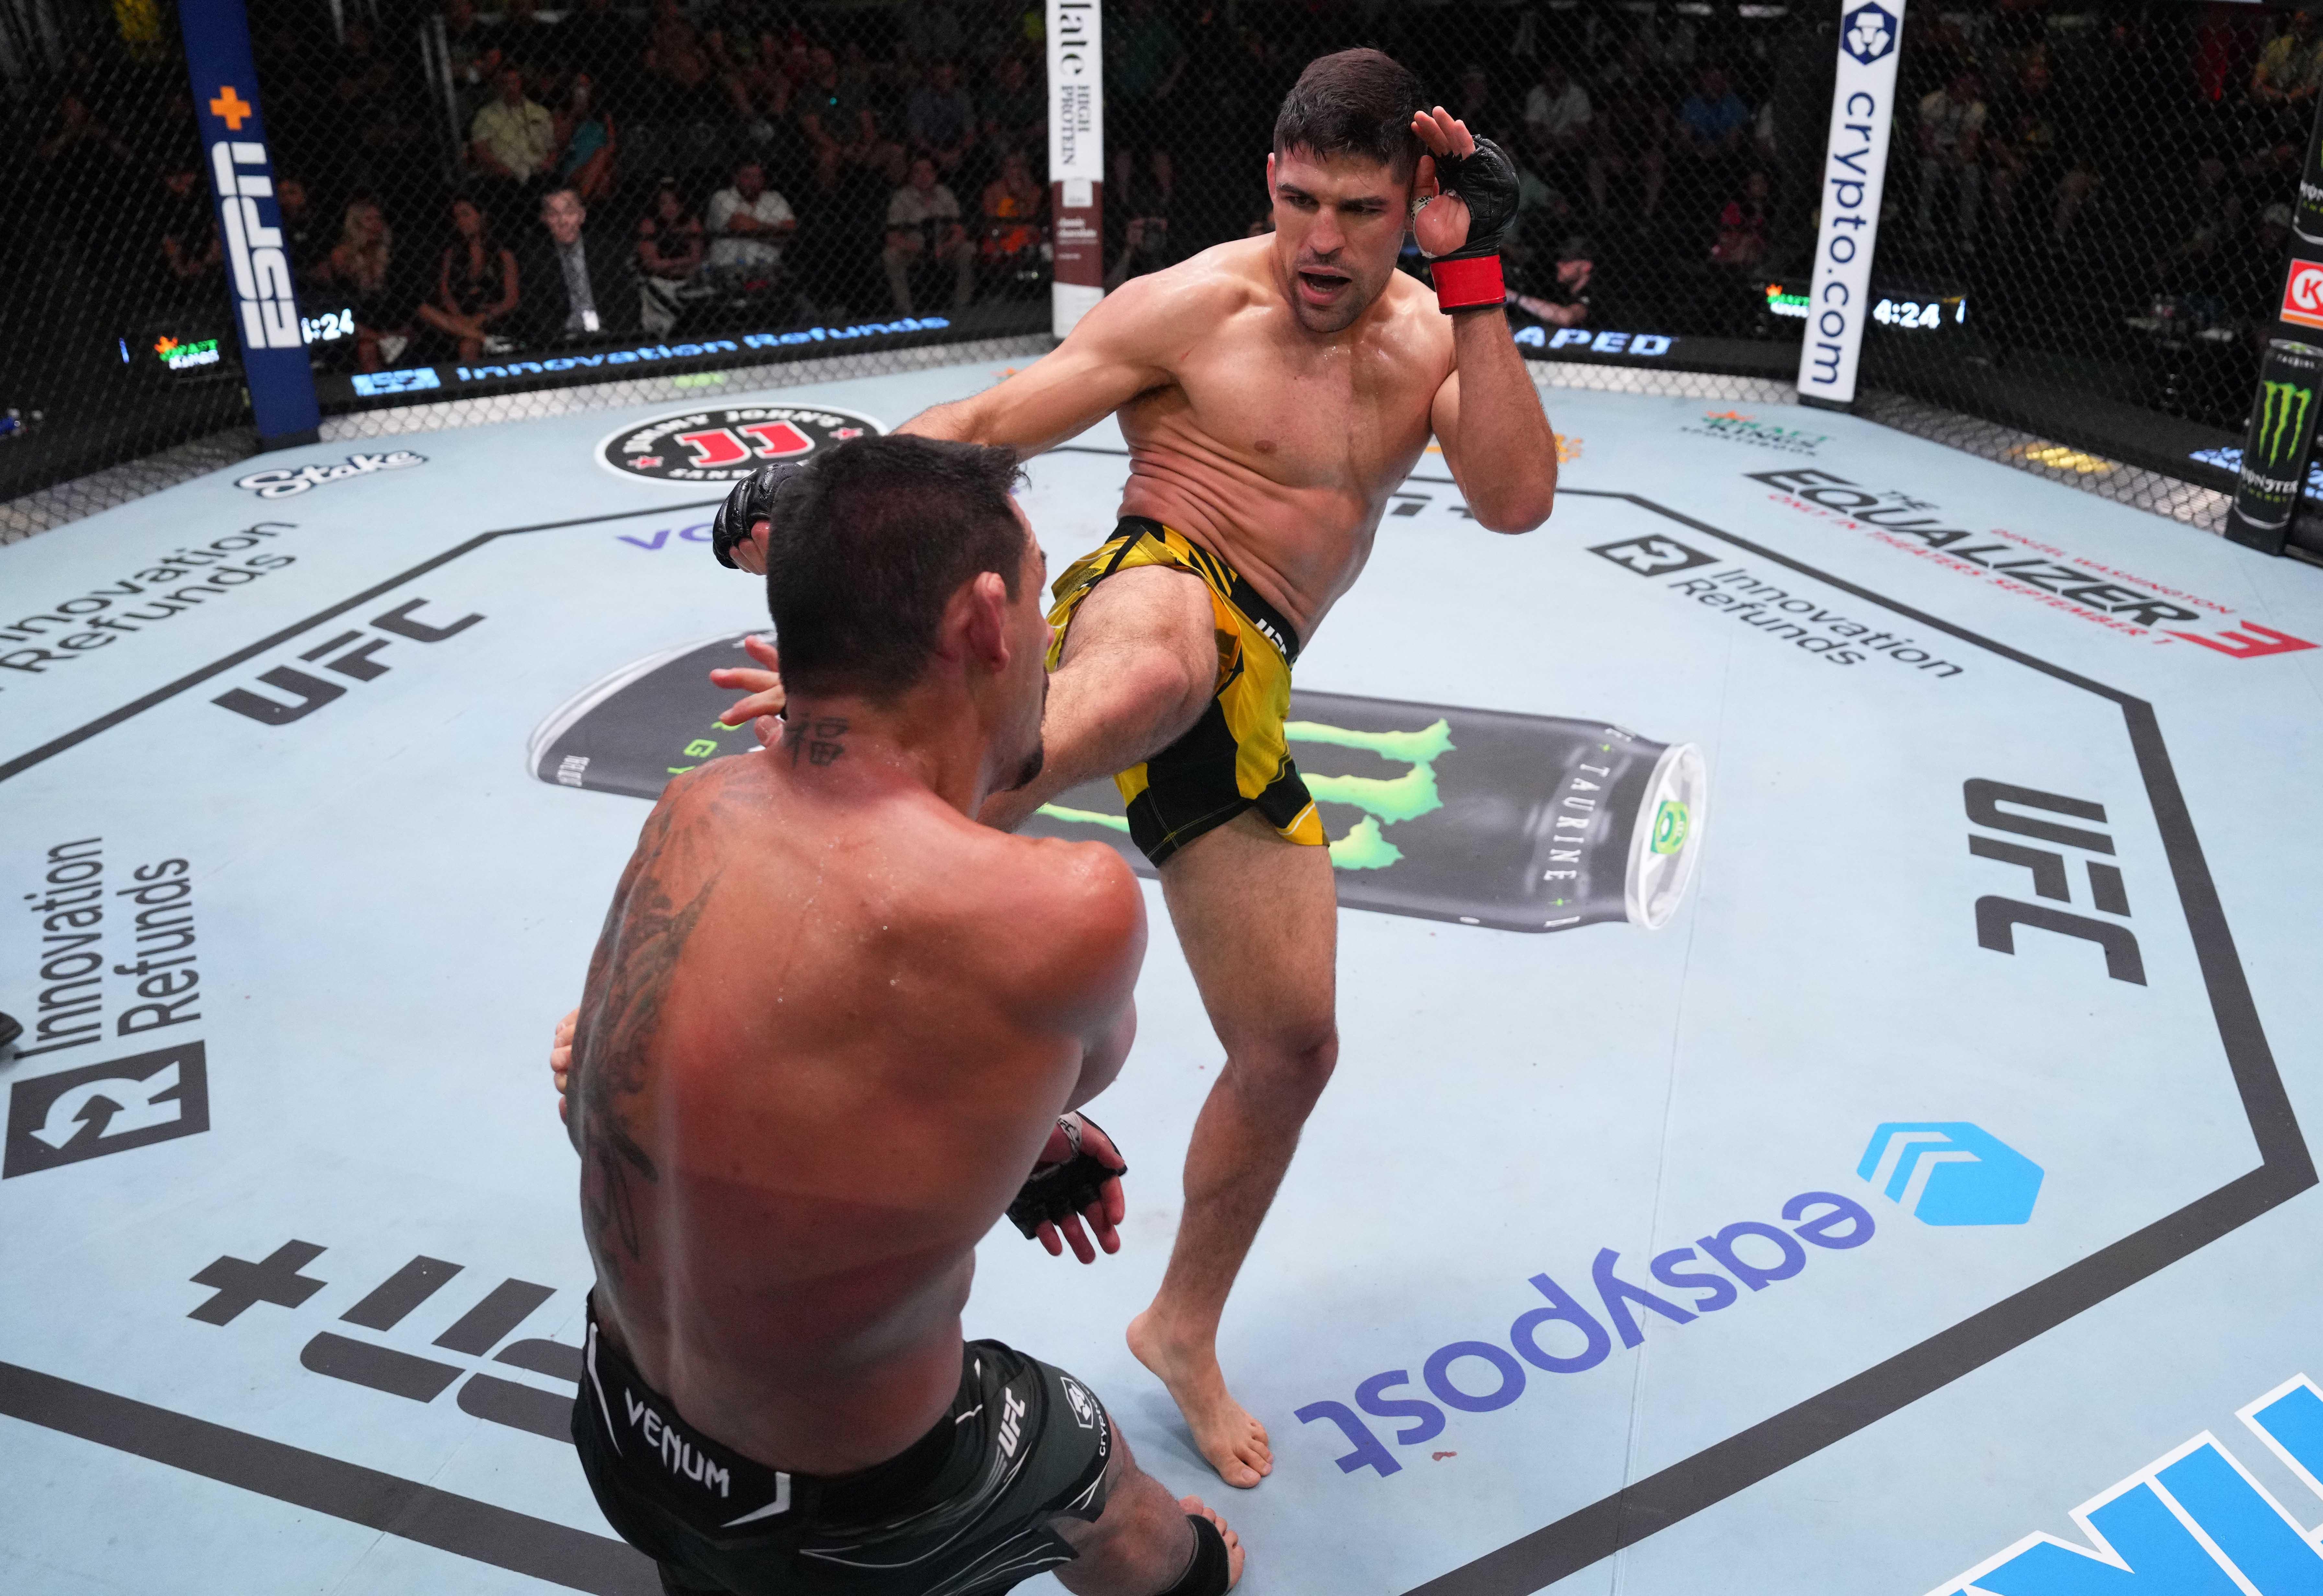 Vicente Luque earns unanimous decision at UFC Fight Night GMA News Online